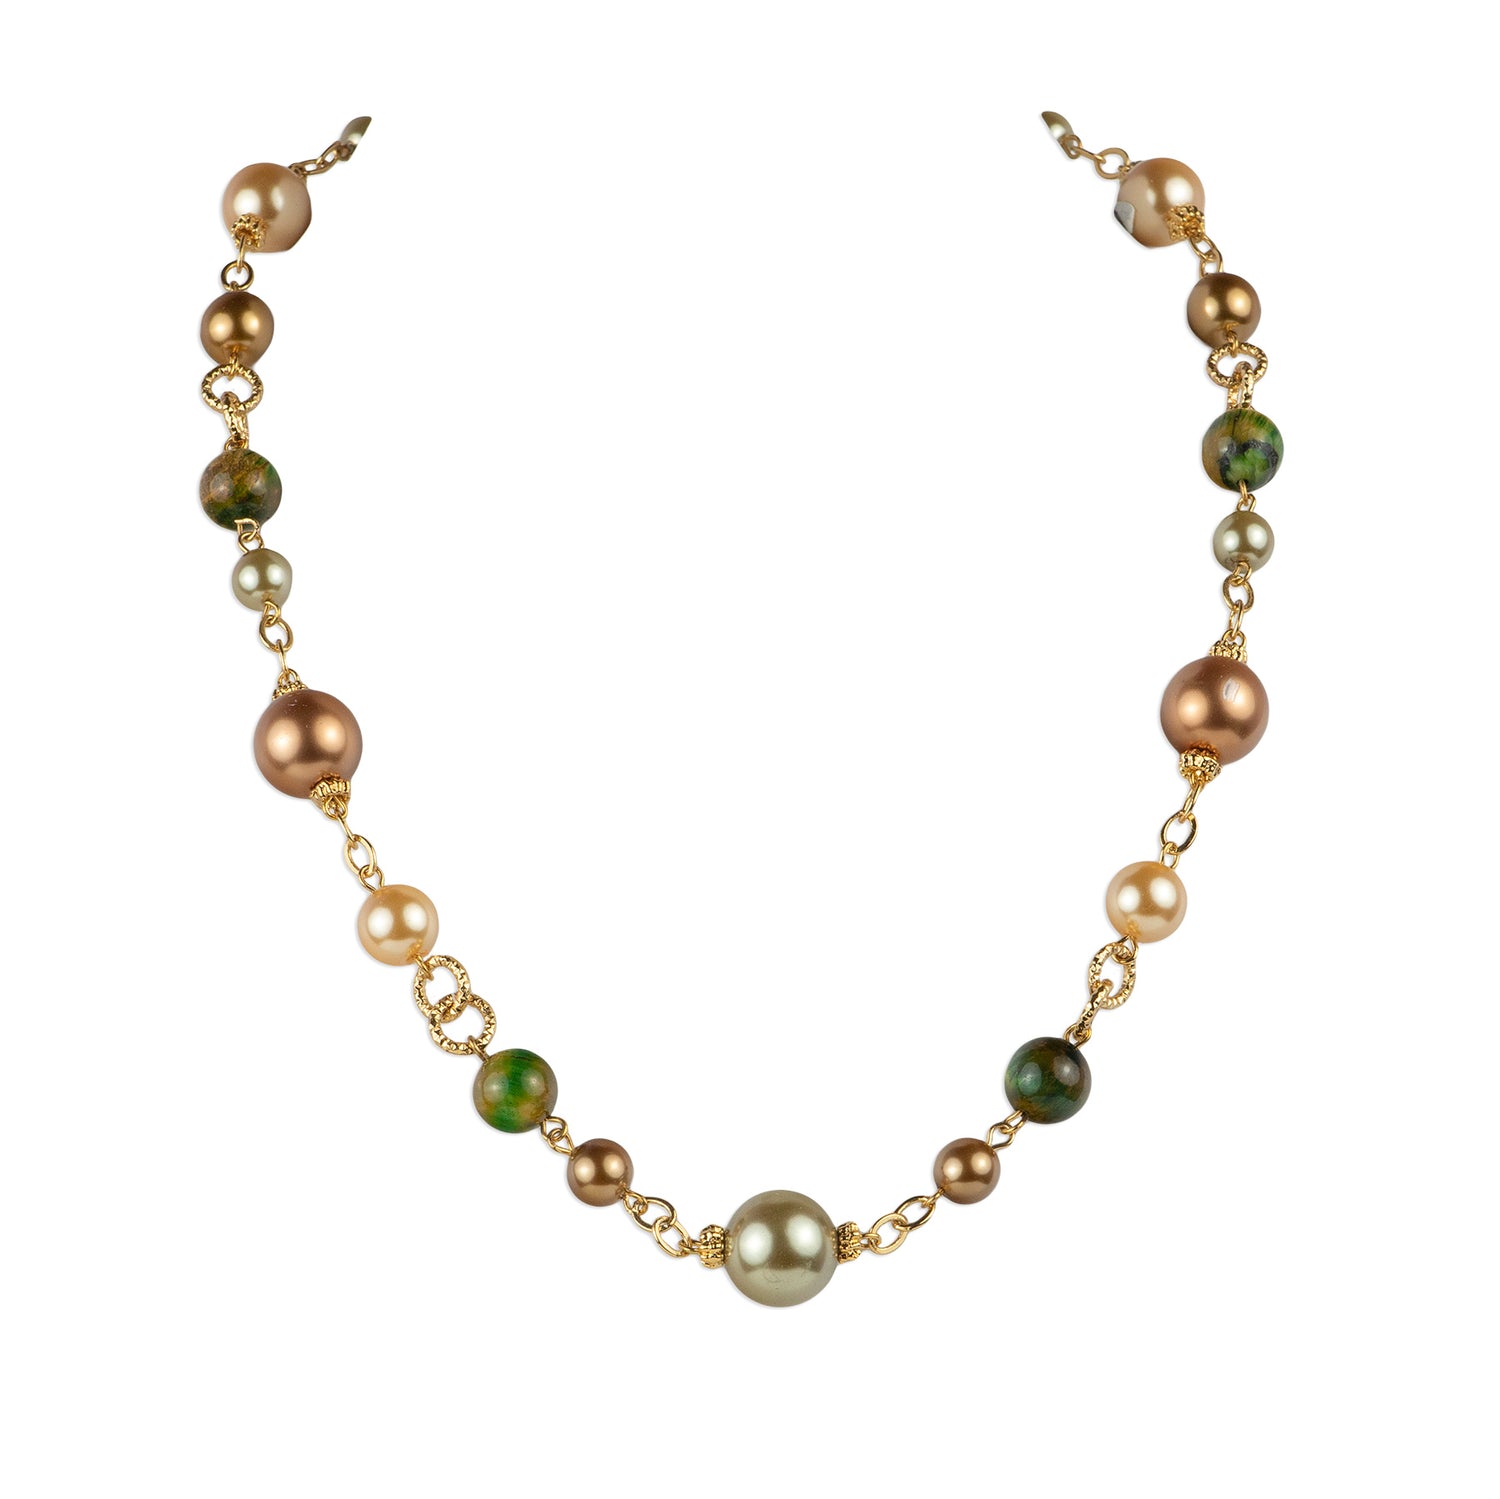 Gemstone and pearl chain choker necklace